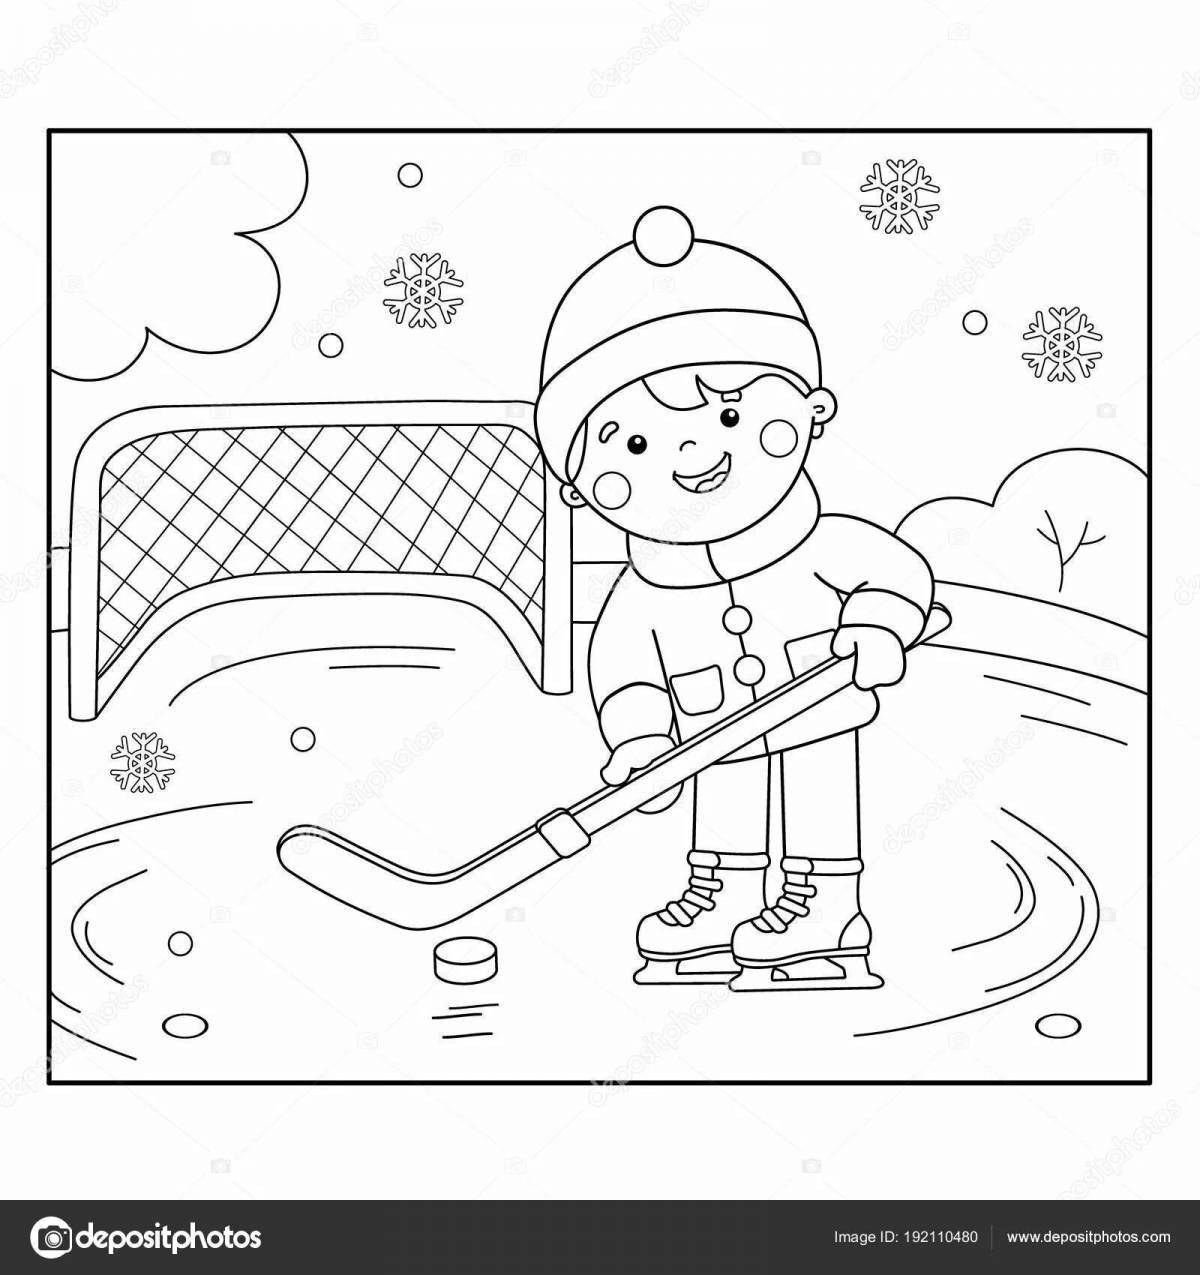 Colouring funny ice rink